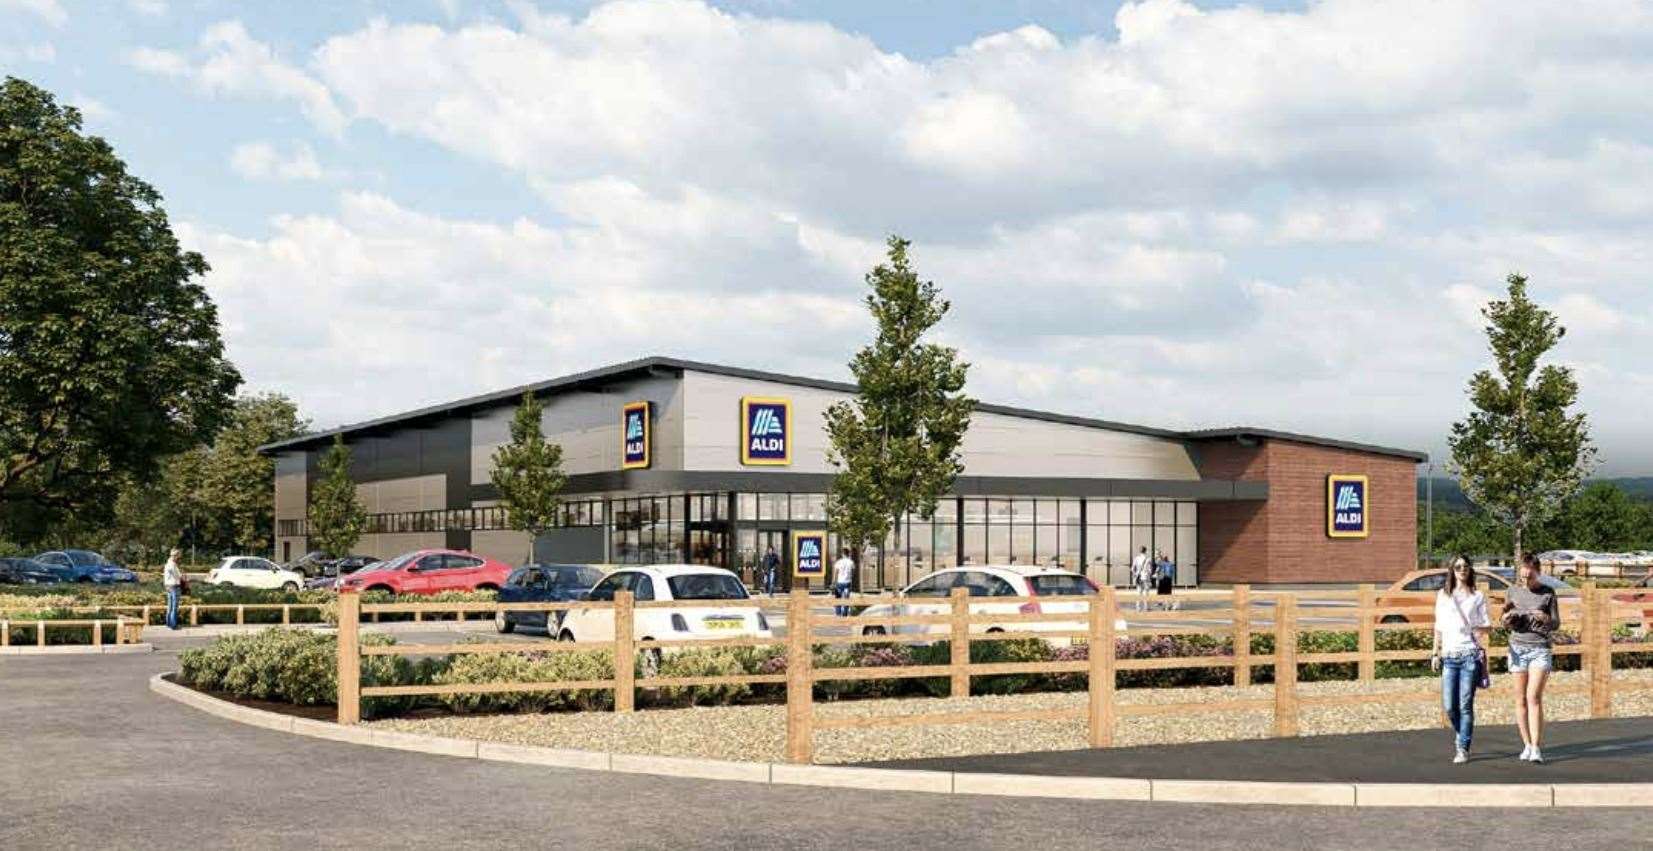 Aldi wants to build a new store in Waterbrook Park in Ashford. Picture: The Harris Partinership/Aldi